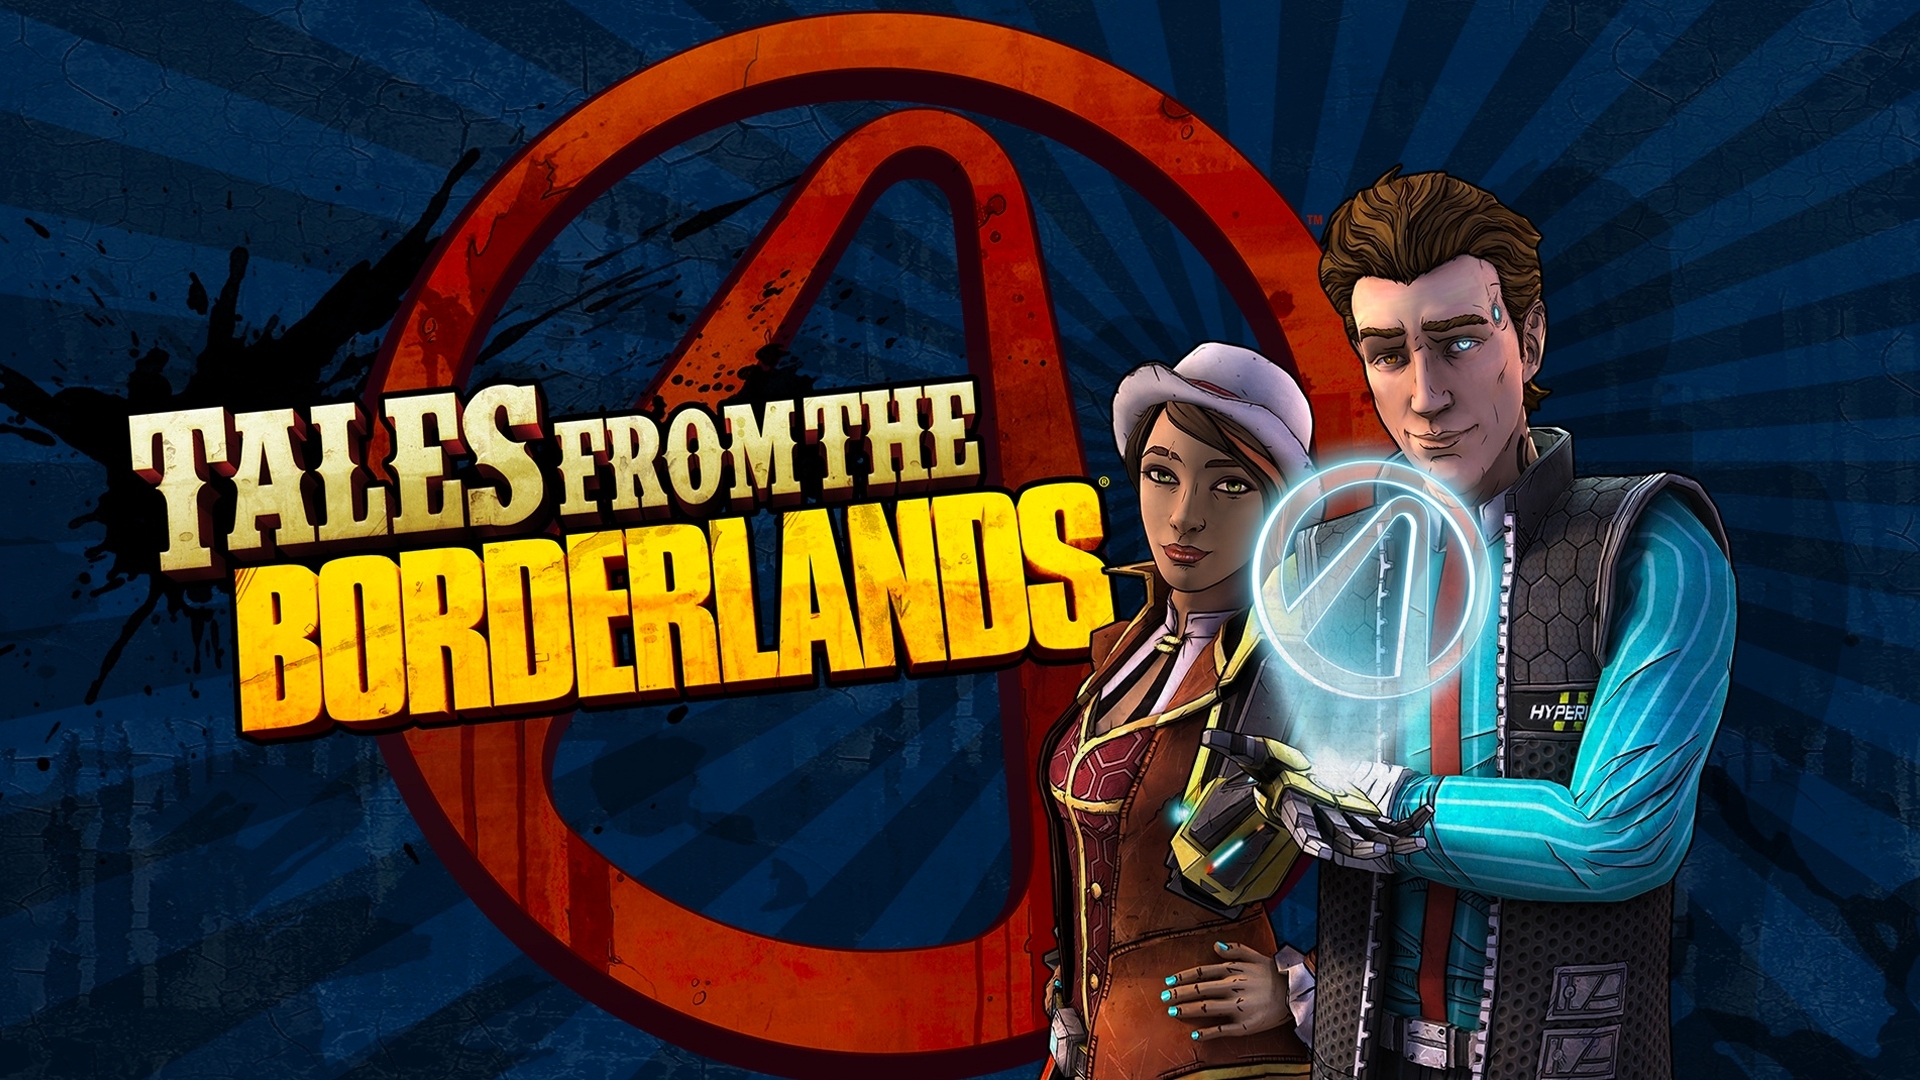 tales from the borderlands game company